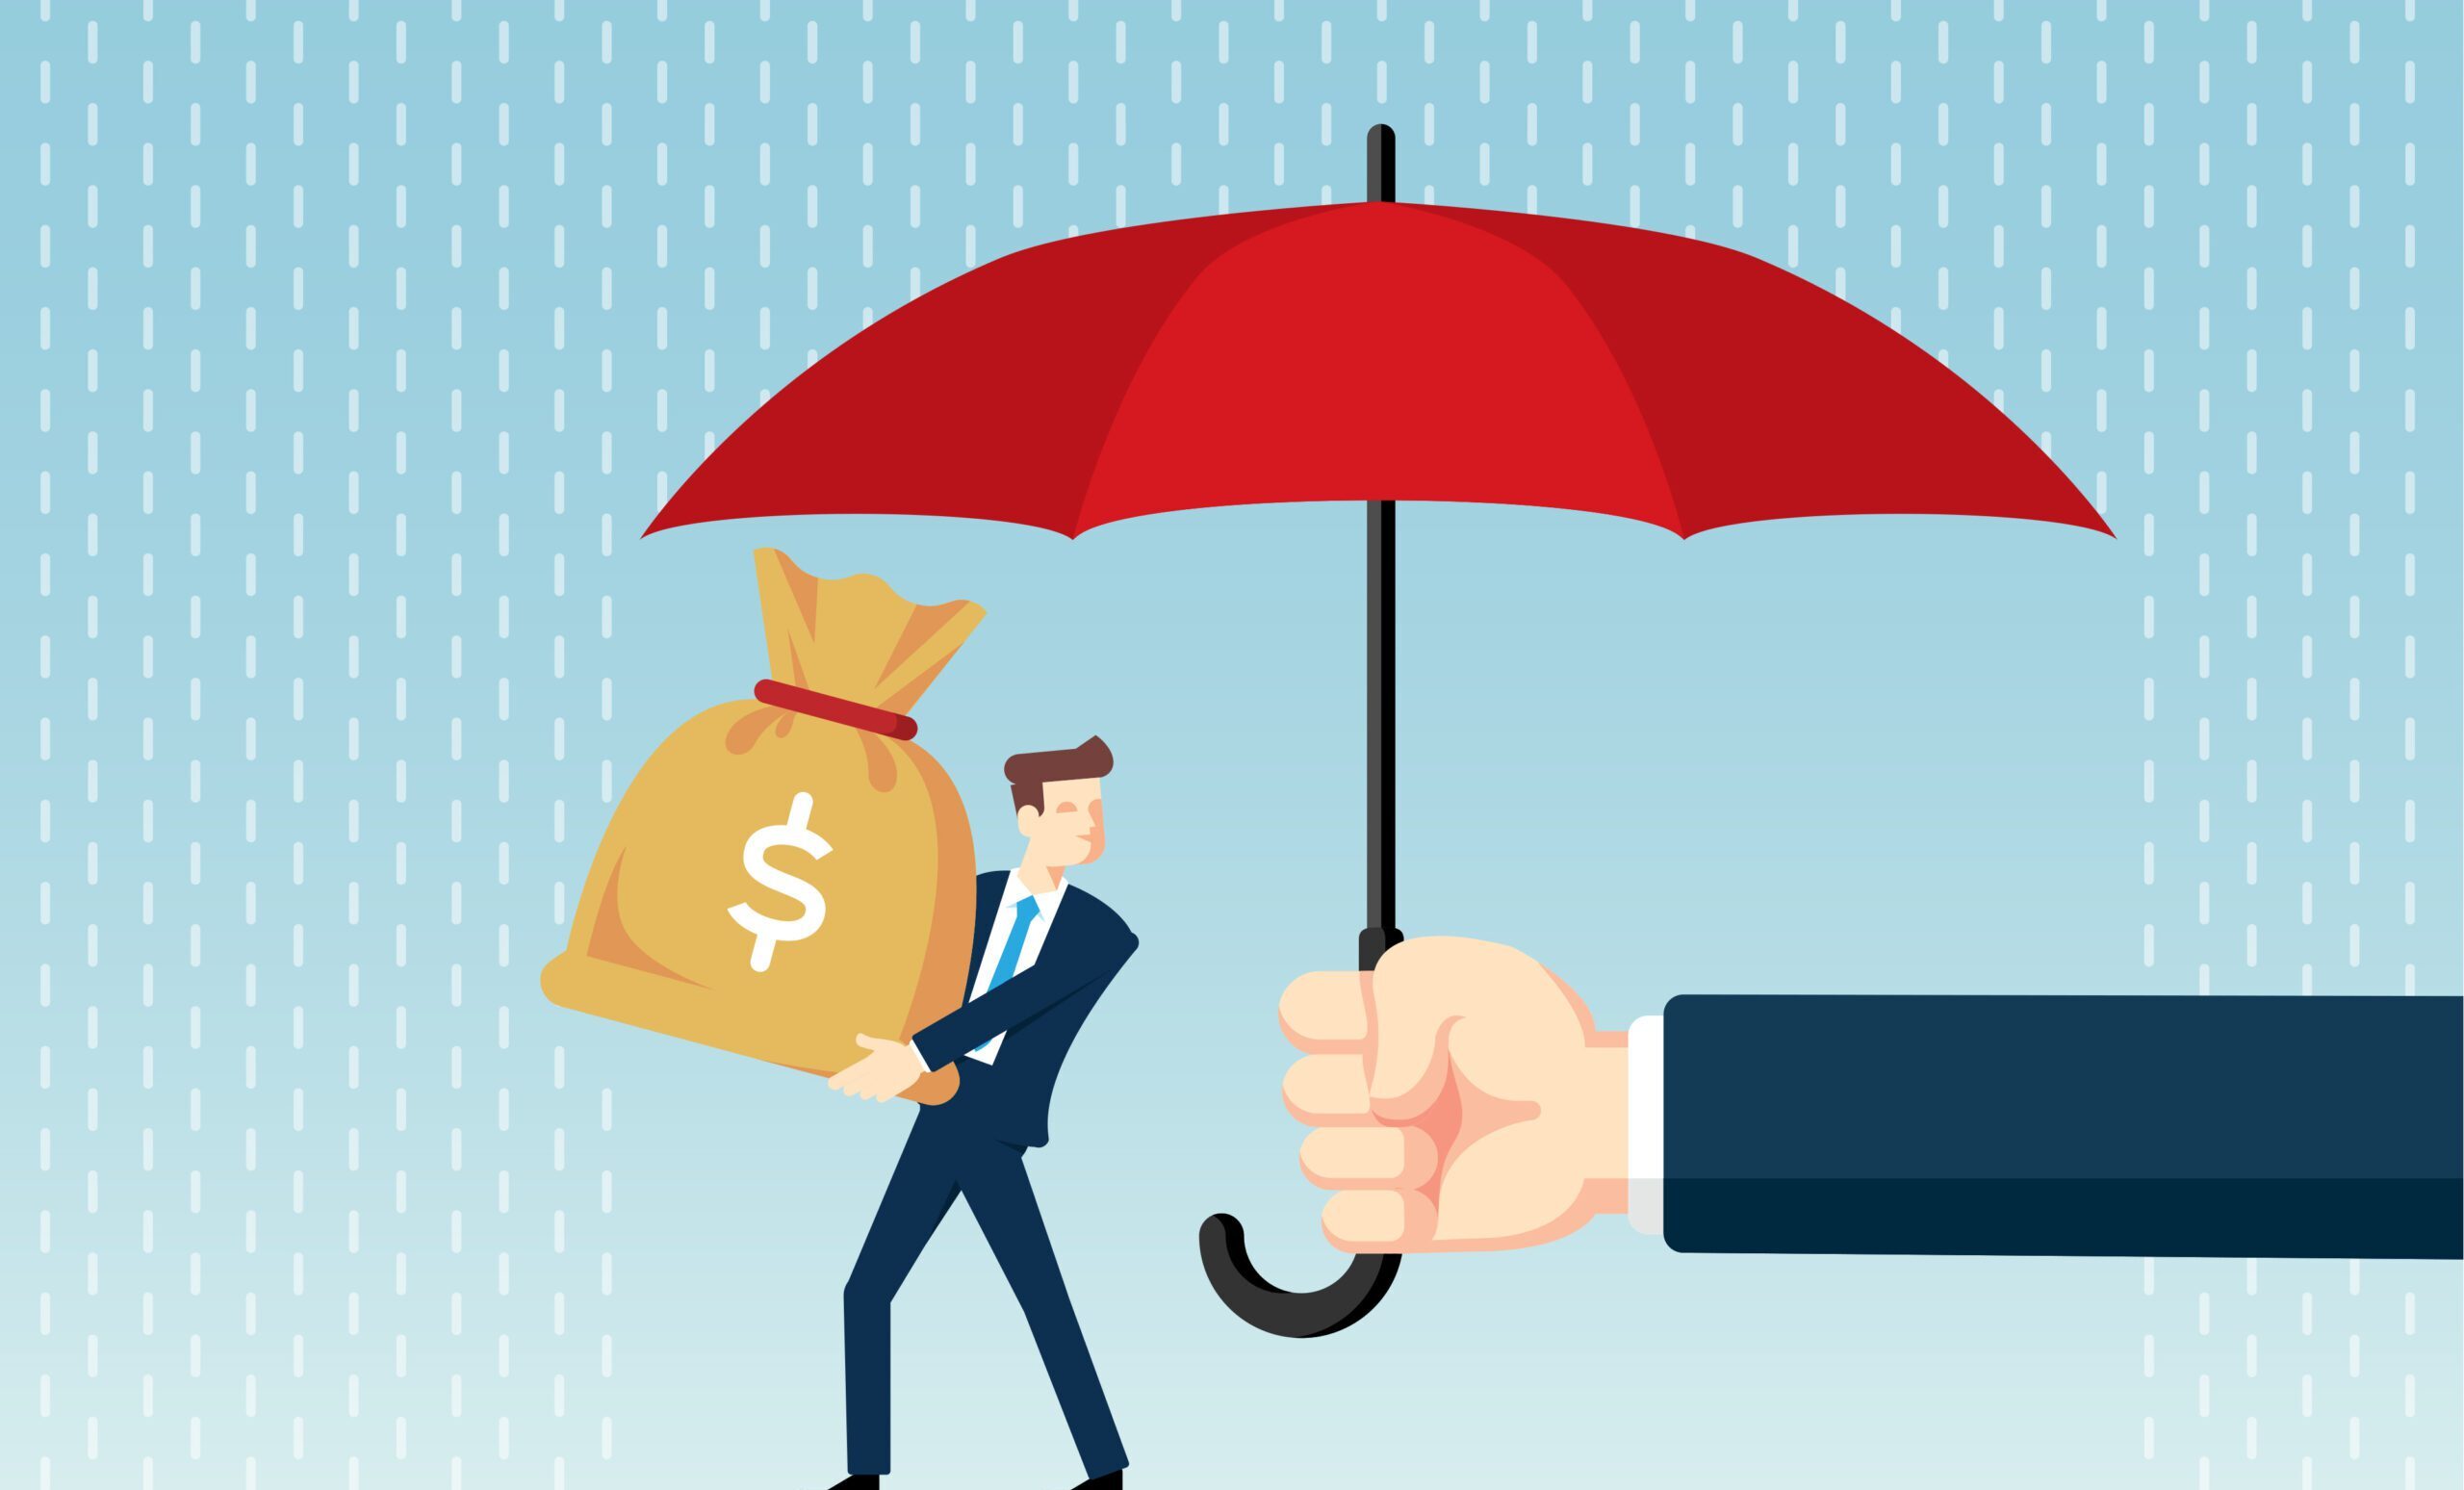 Arm holding umbrella over a man holding a bag of money to protect from rain